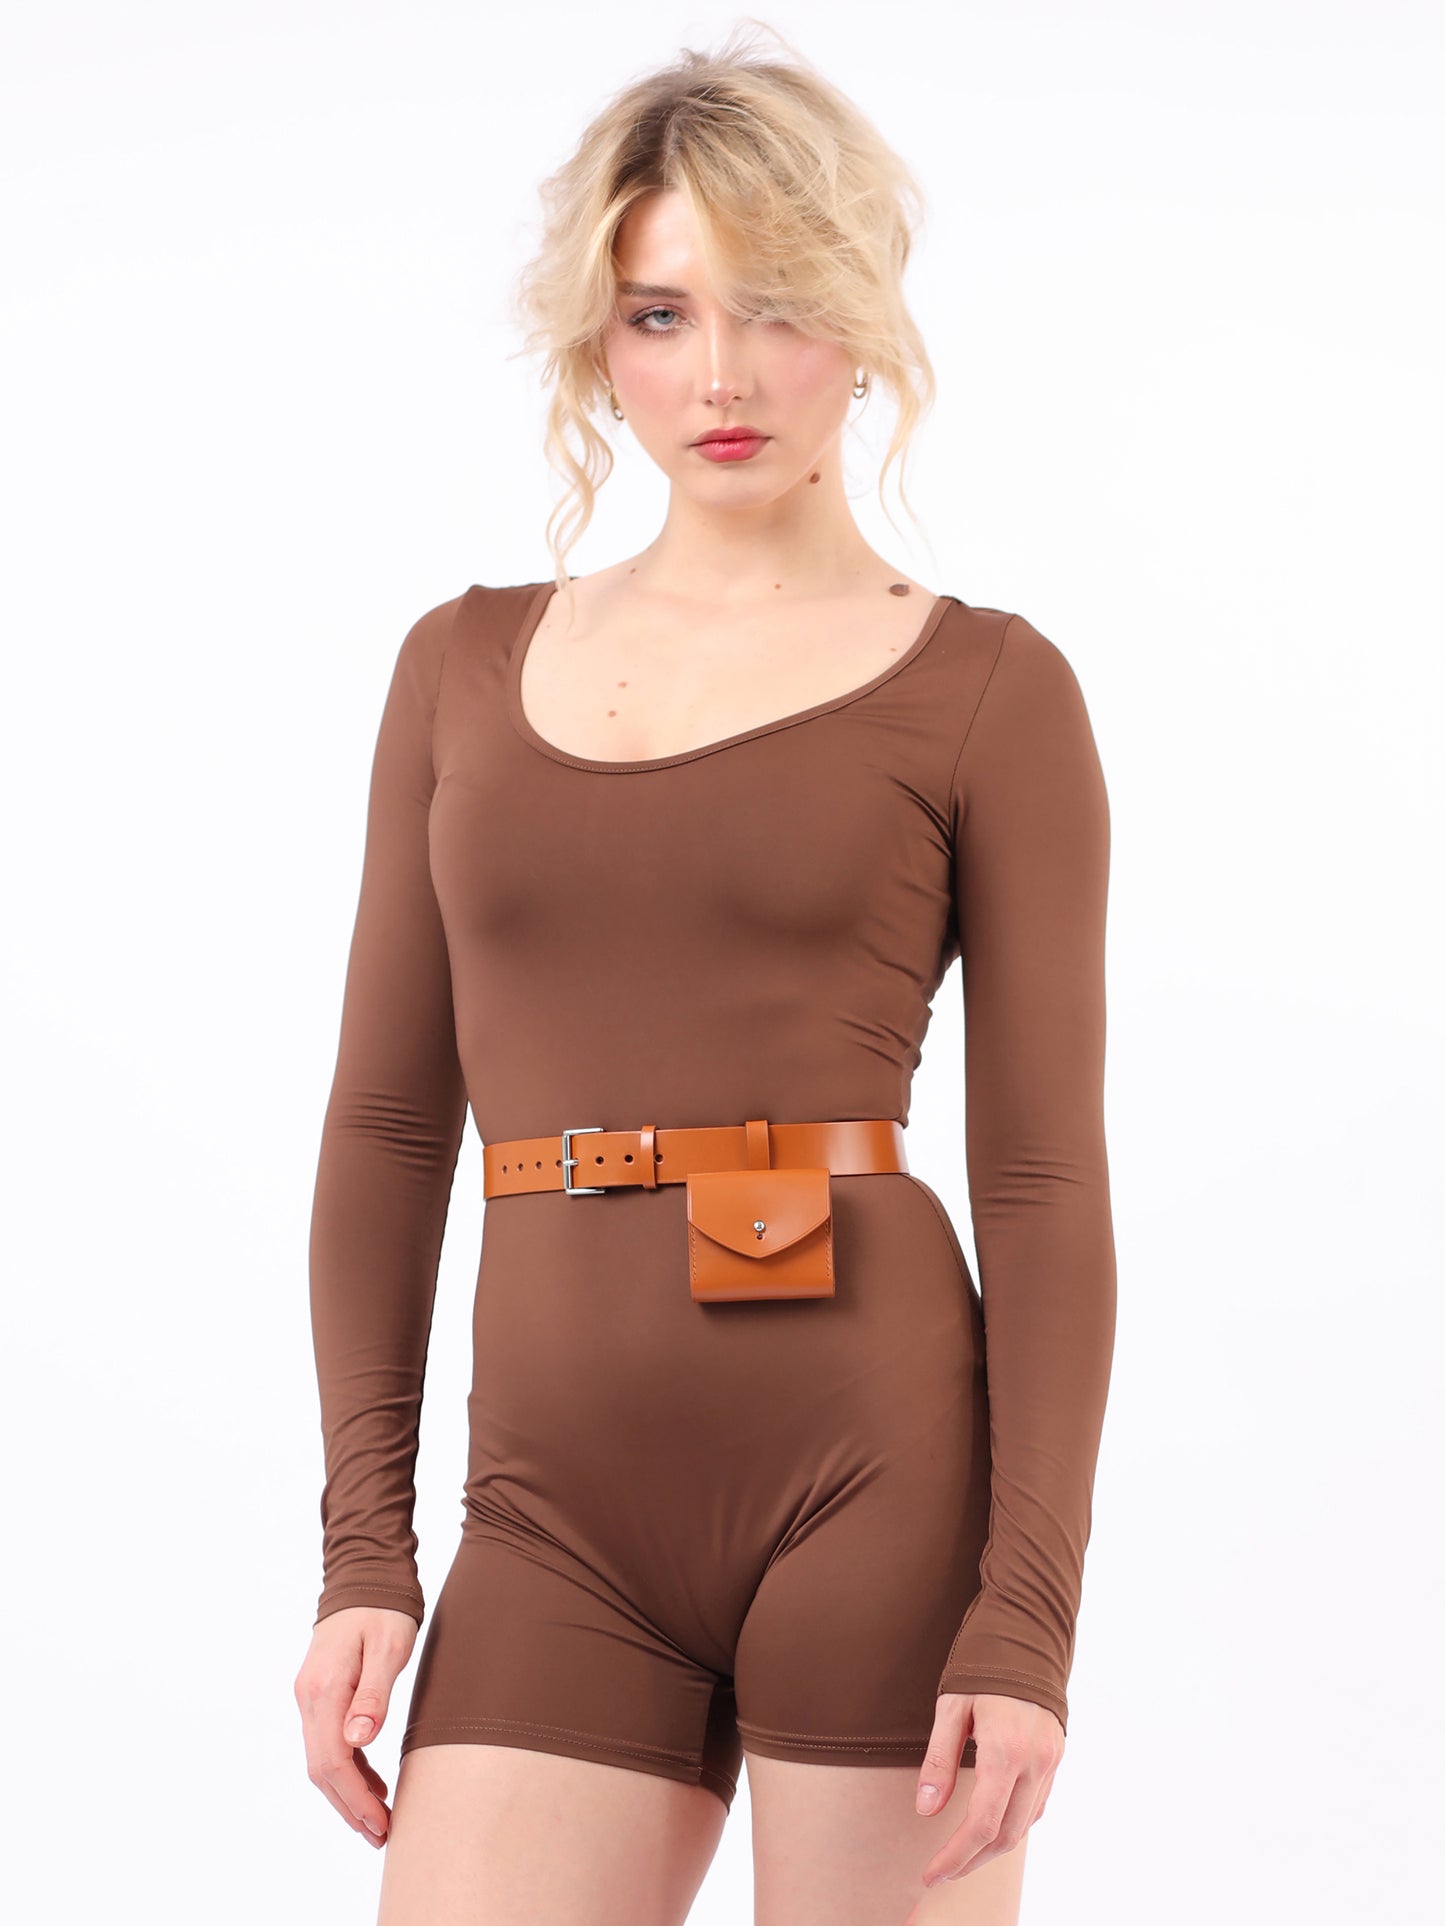 Light brown micro belt bag fitted on woman wearing brown jumpsuit.